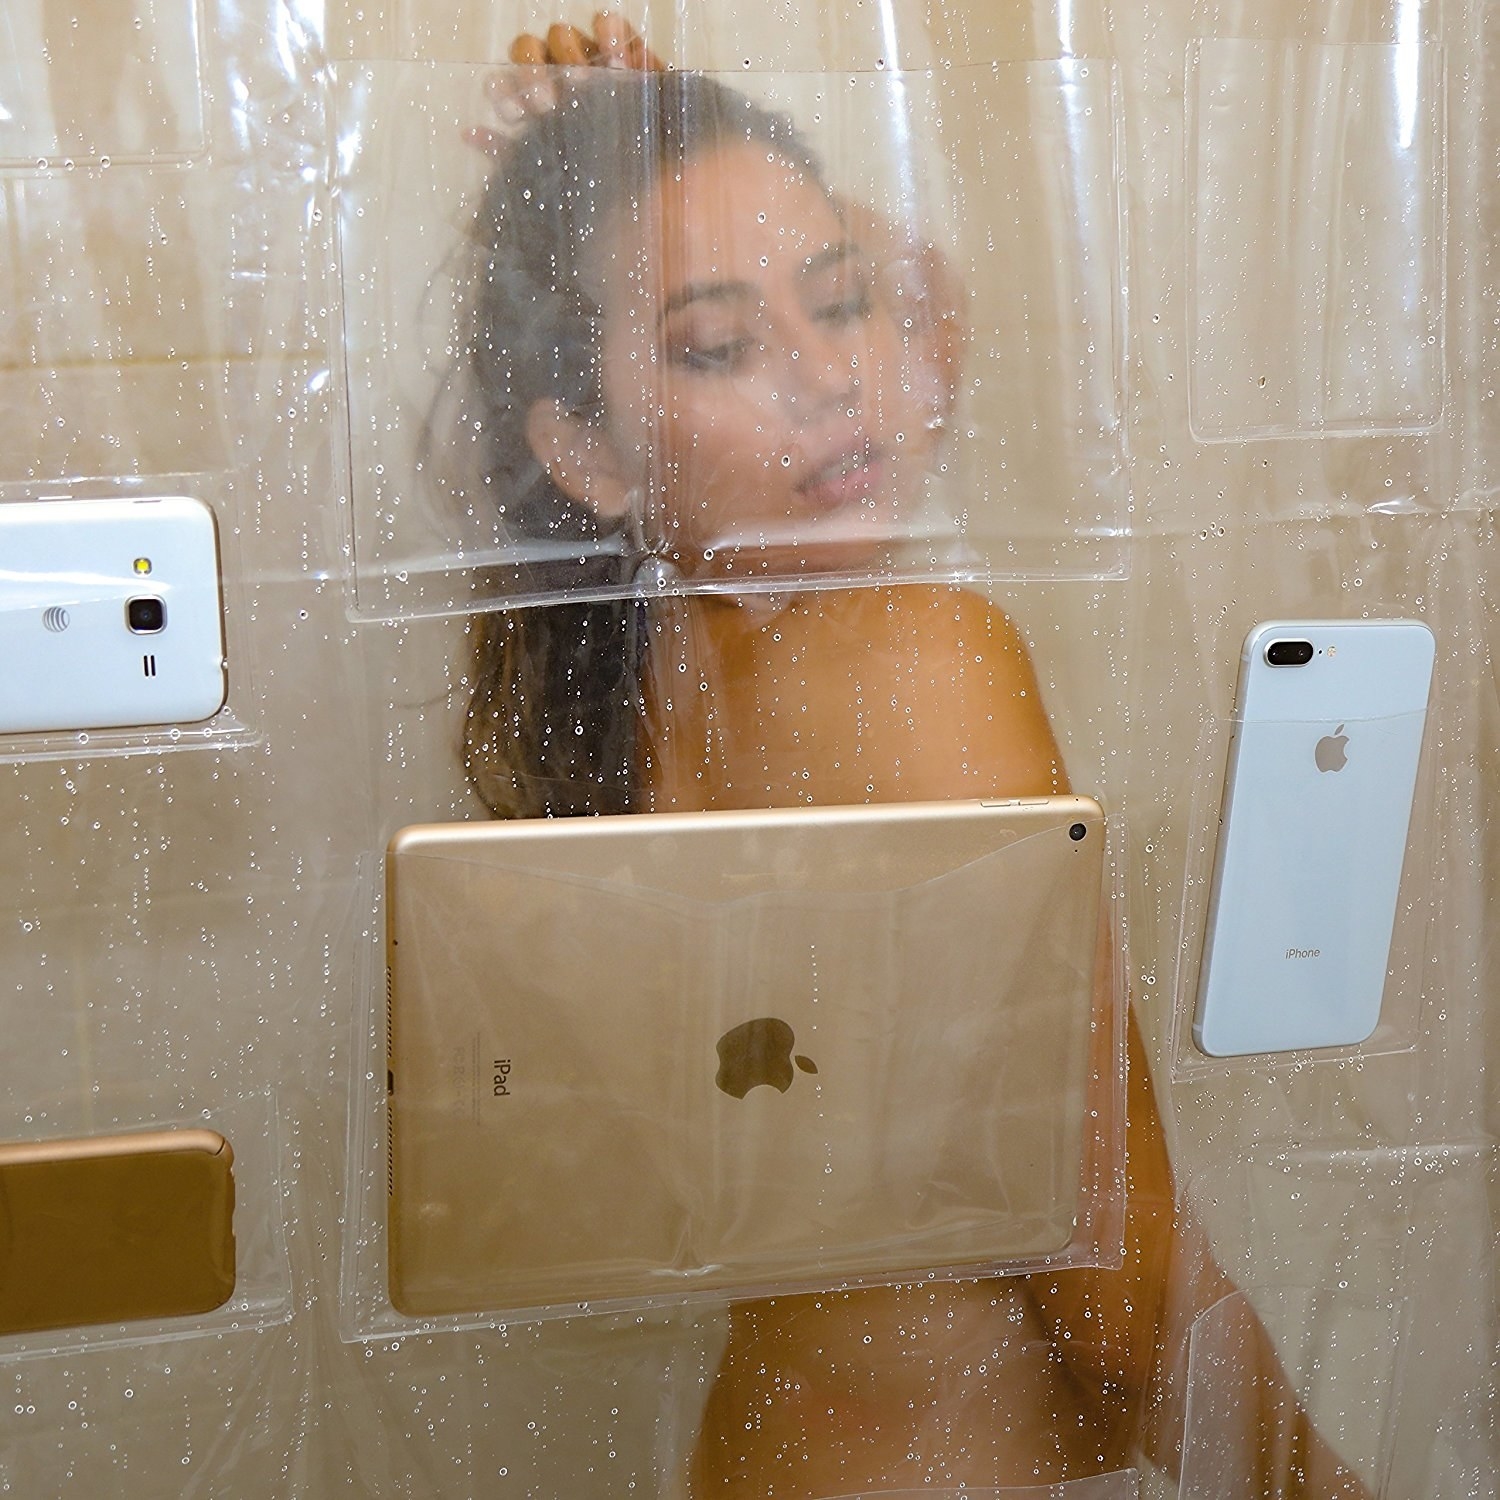 model showers with watching tv on ipad in clear pocket 